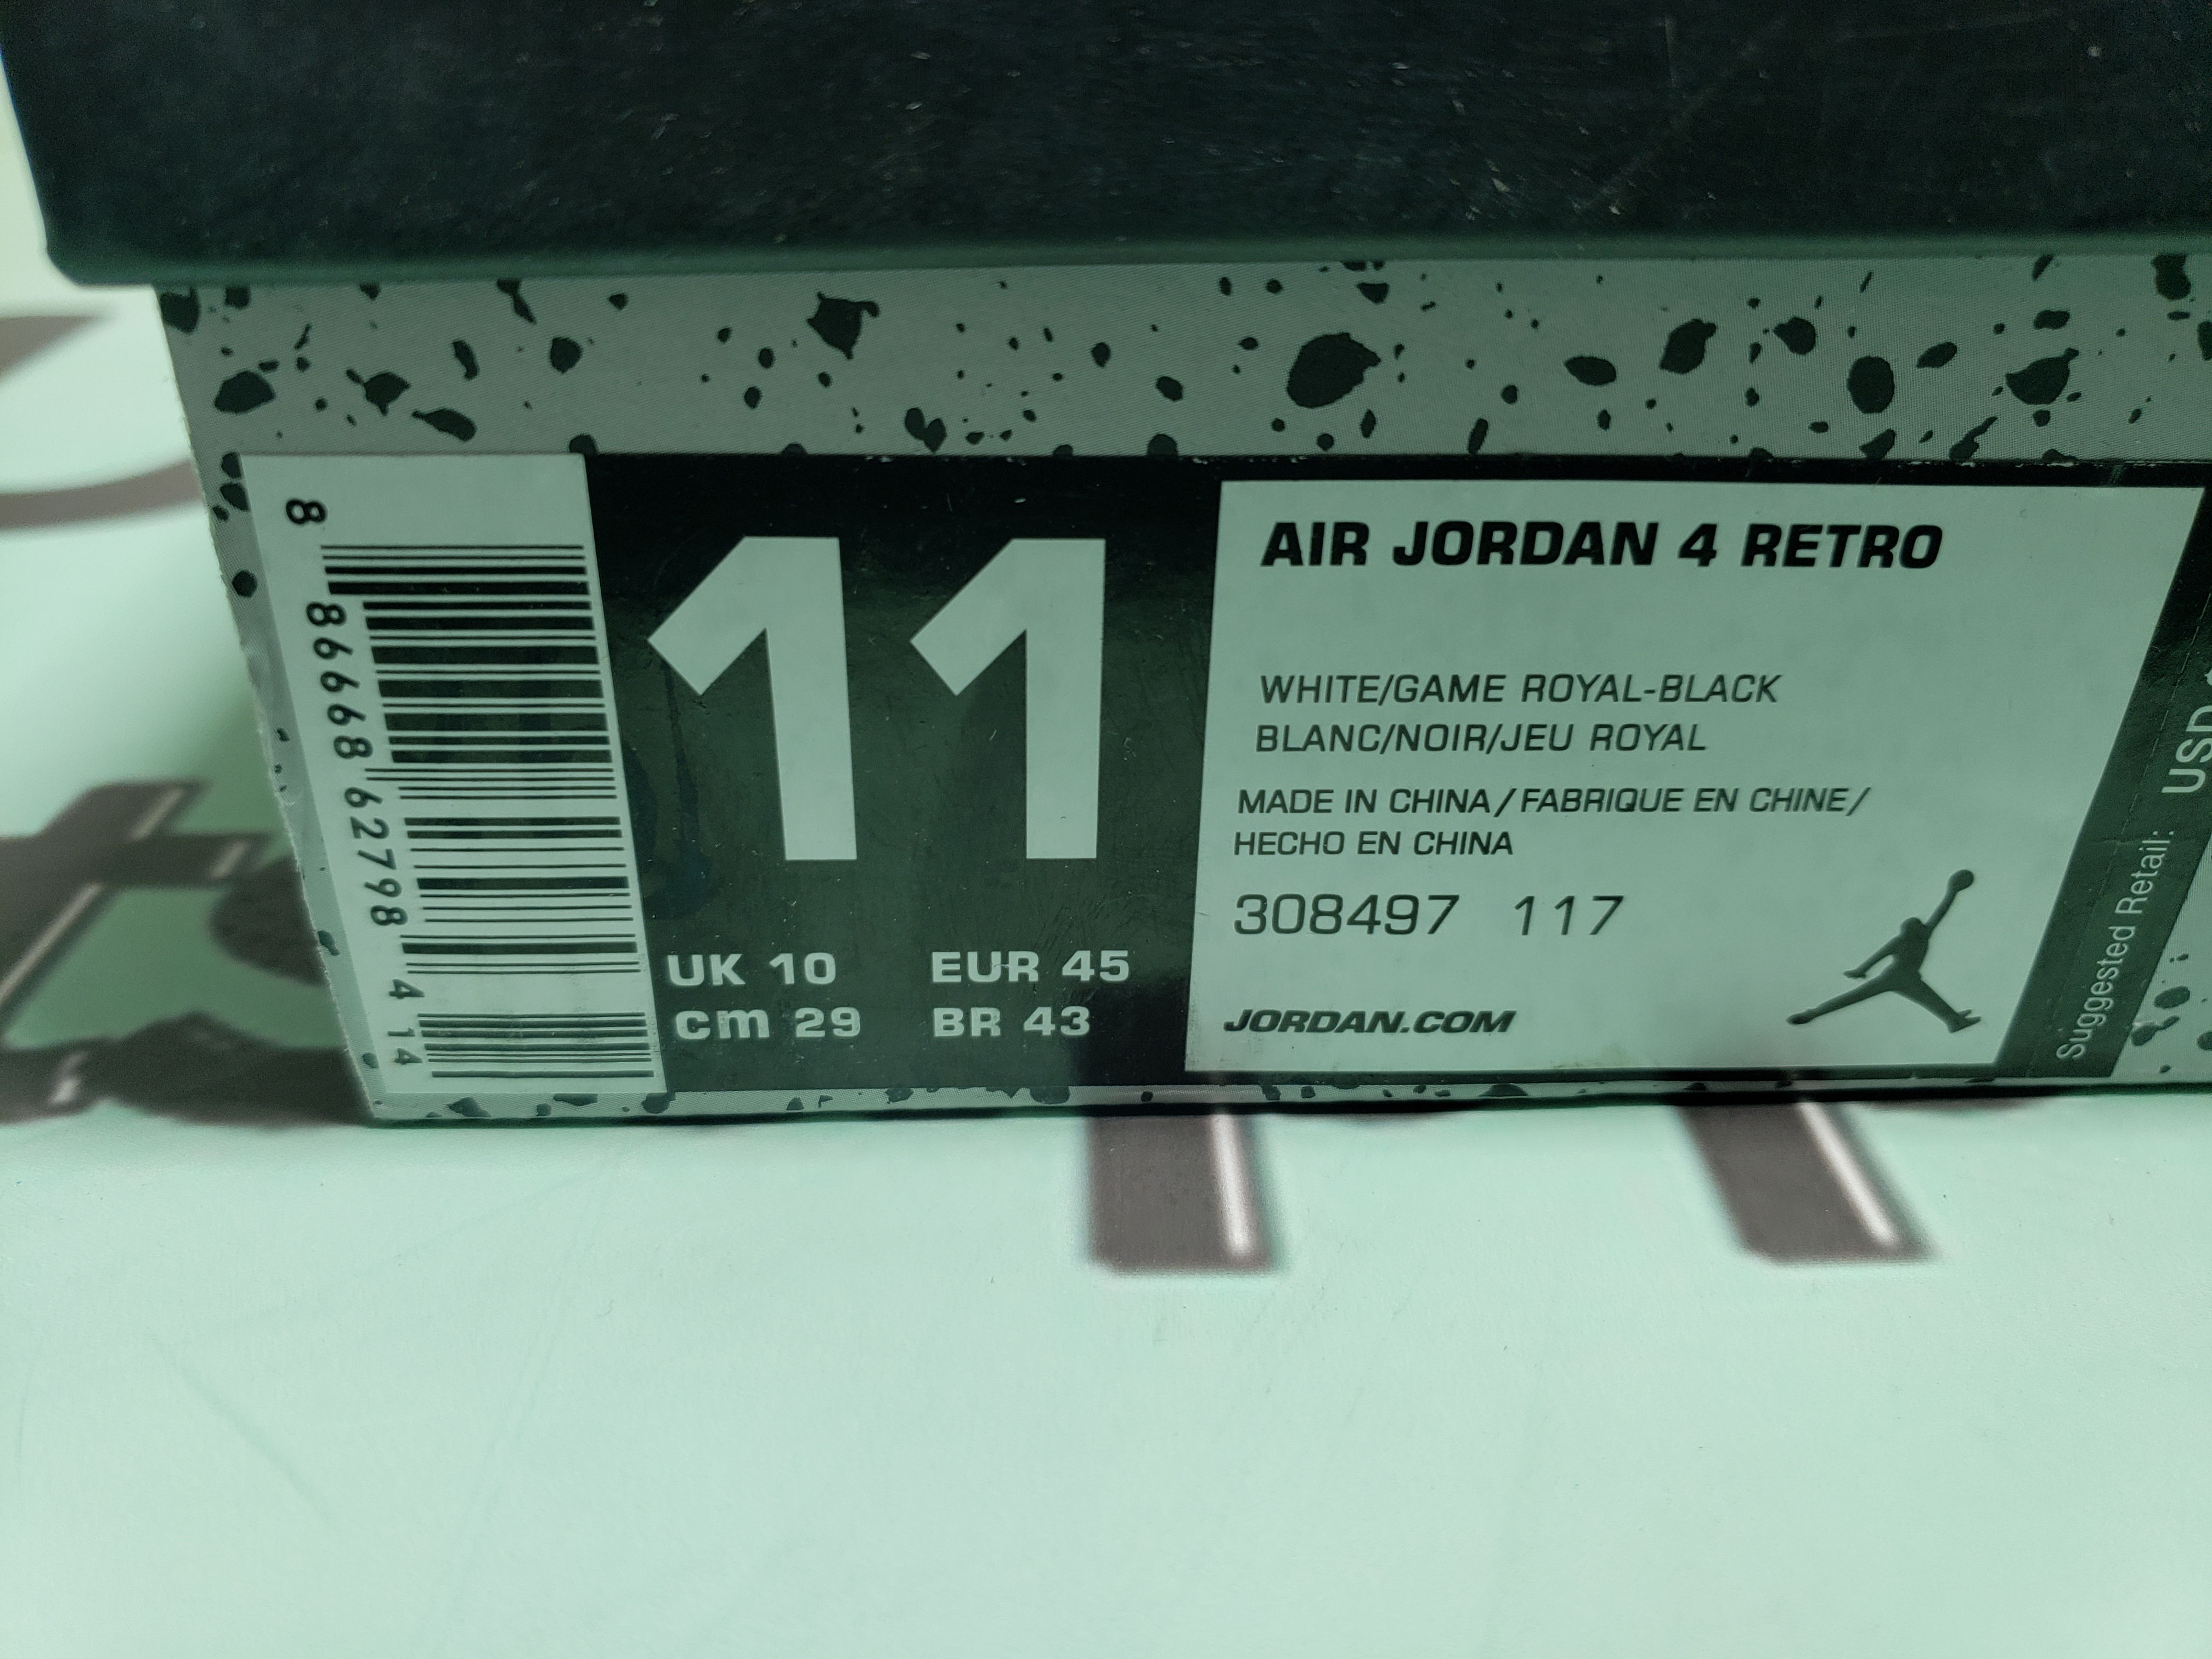 in addition to the Air Jordan 13 Ray Allen PE